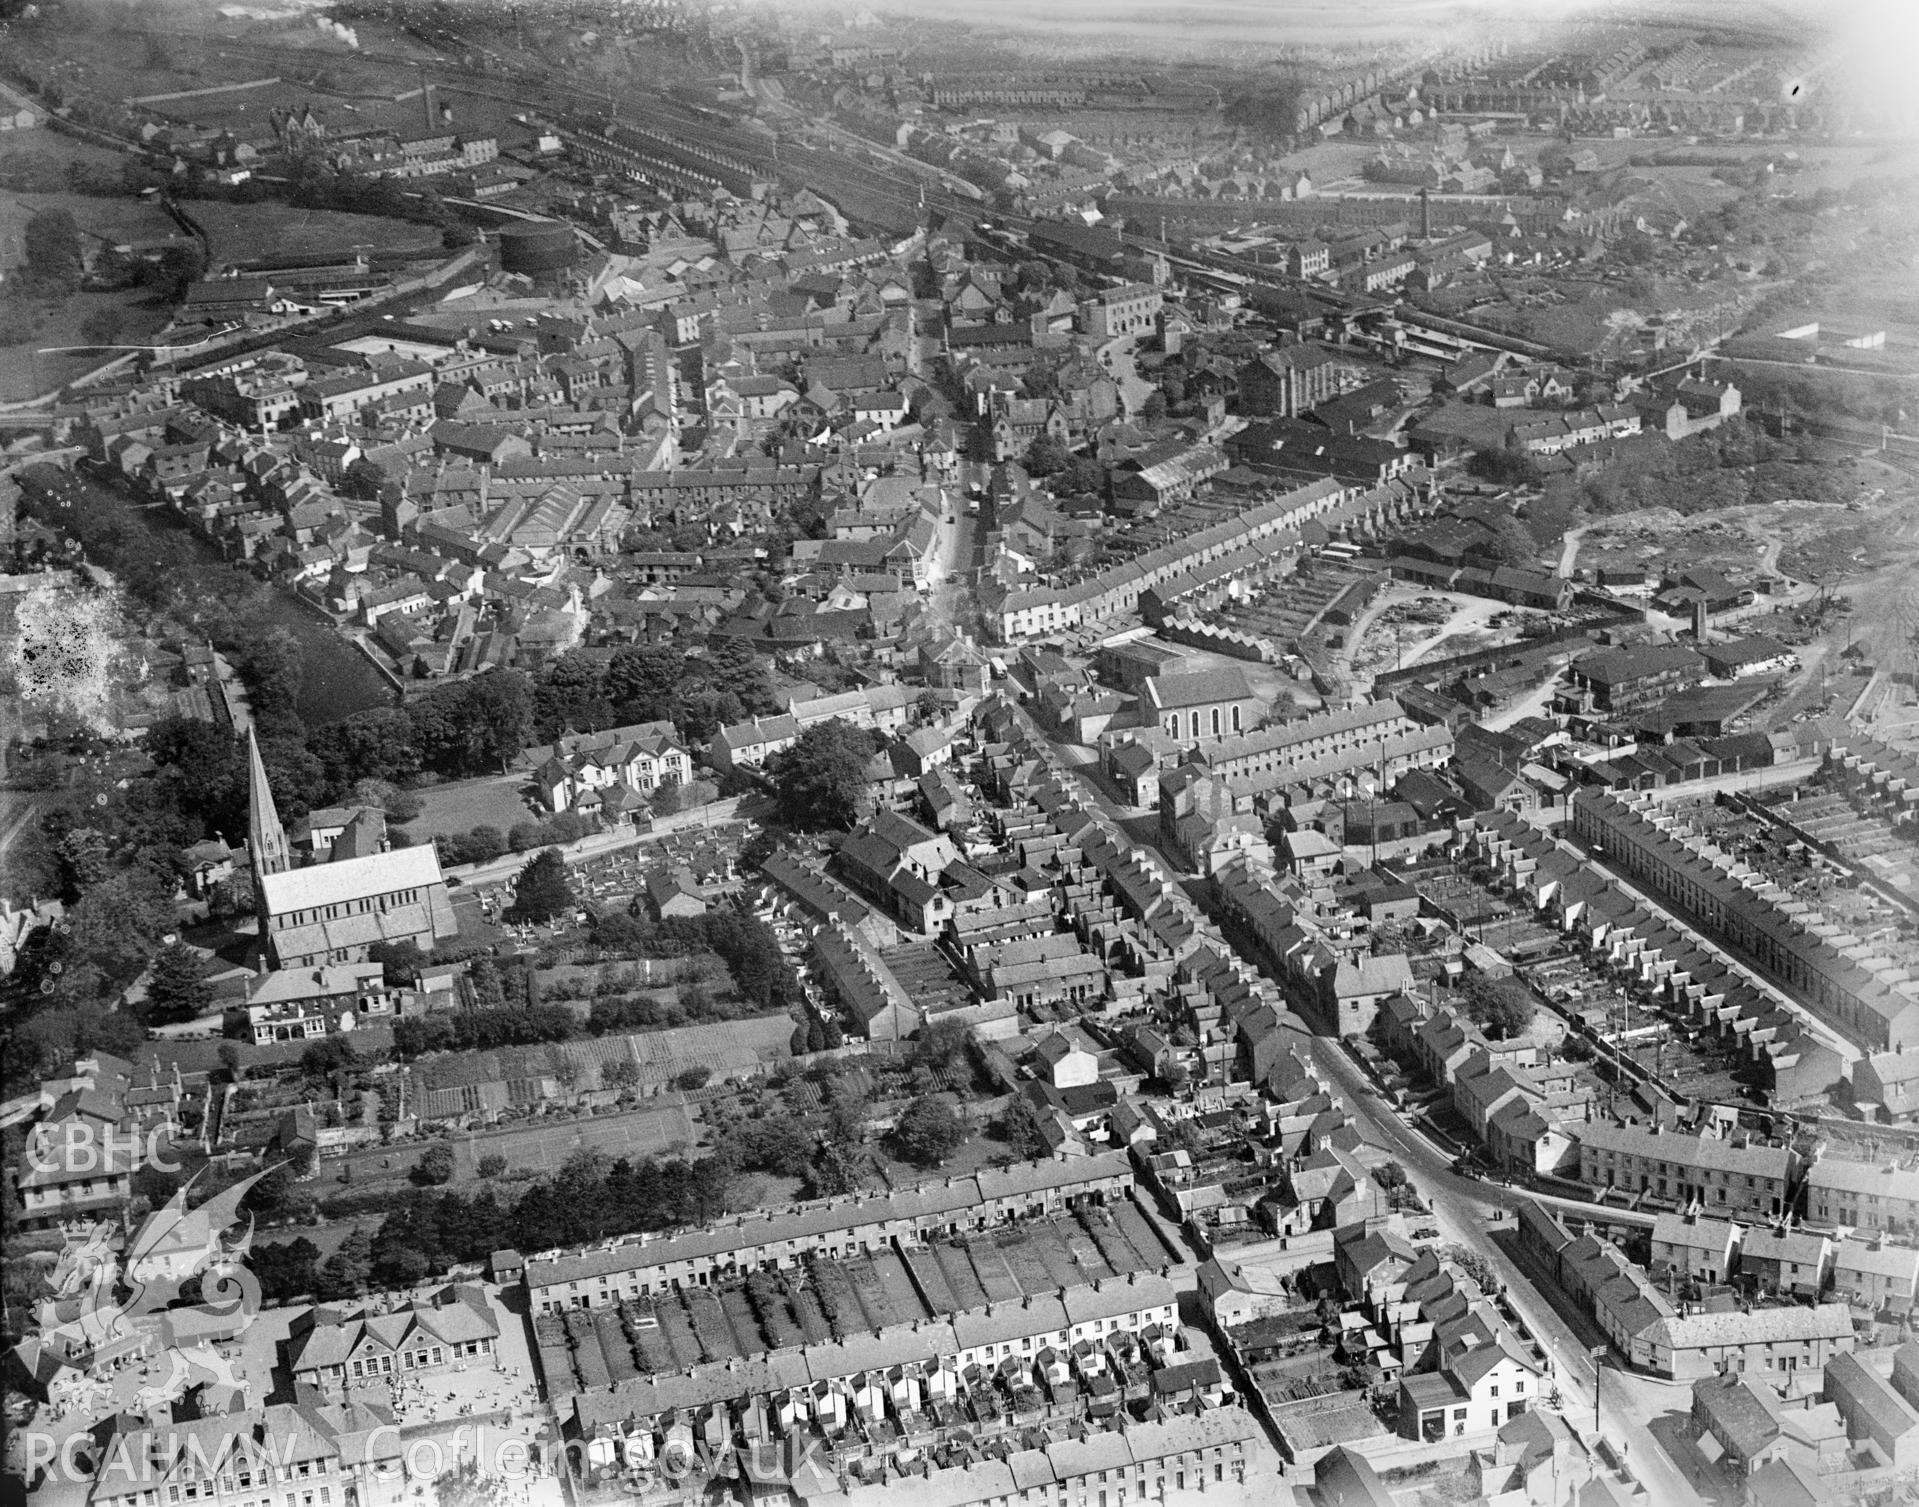 View of Bridgend showing St Marys church and Hermon chapel, oblique aerial view. 5?x4? black and white glass plate negative.